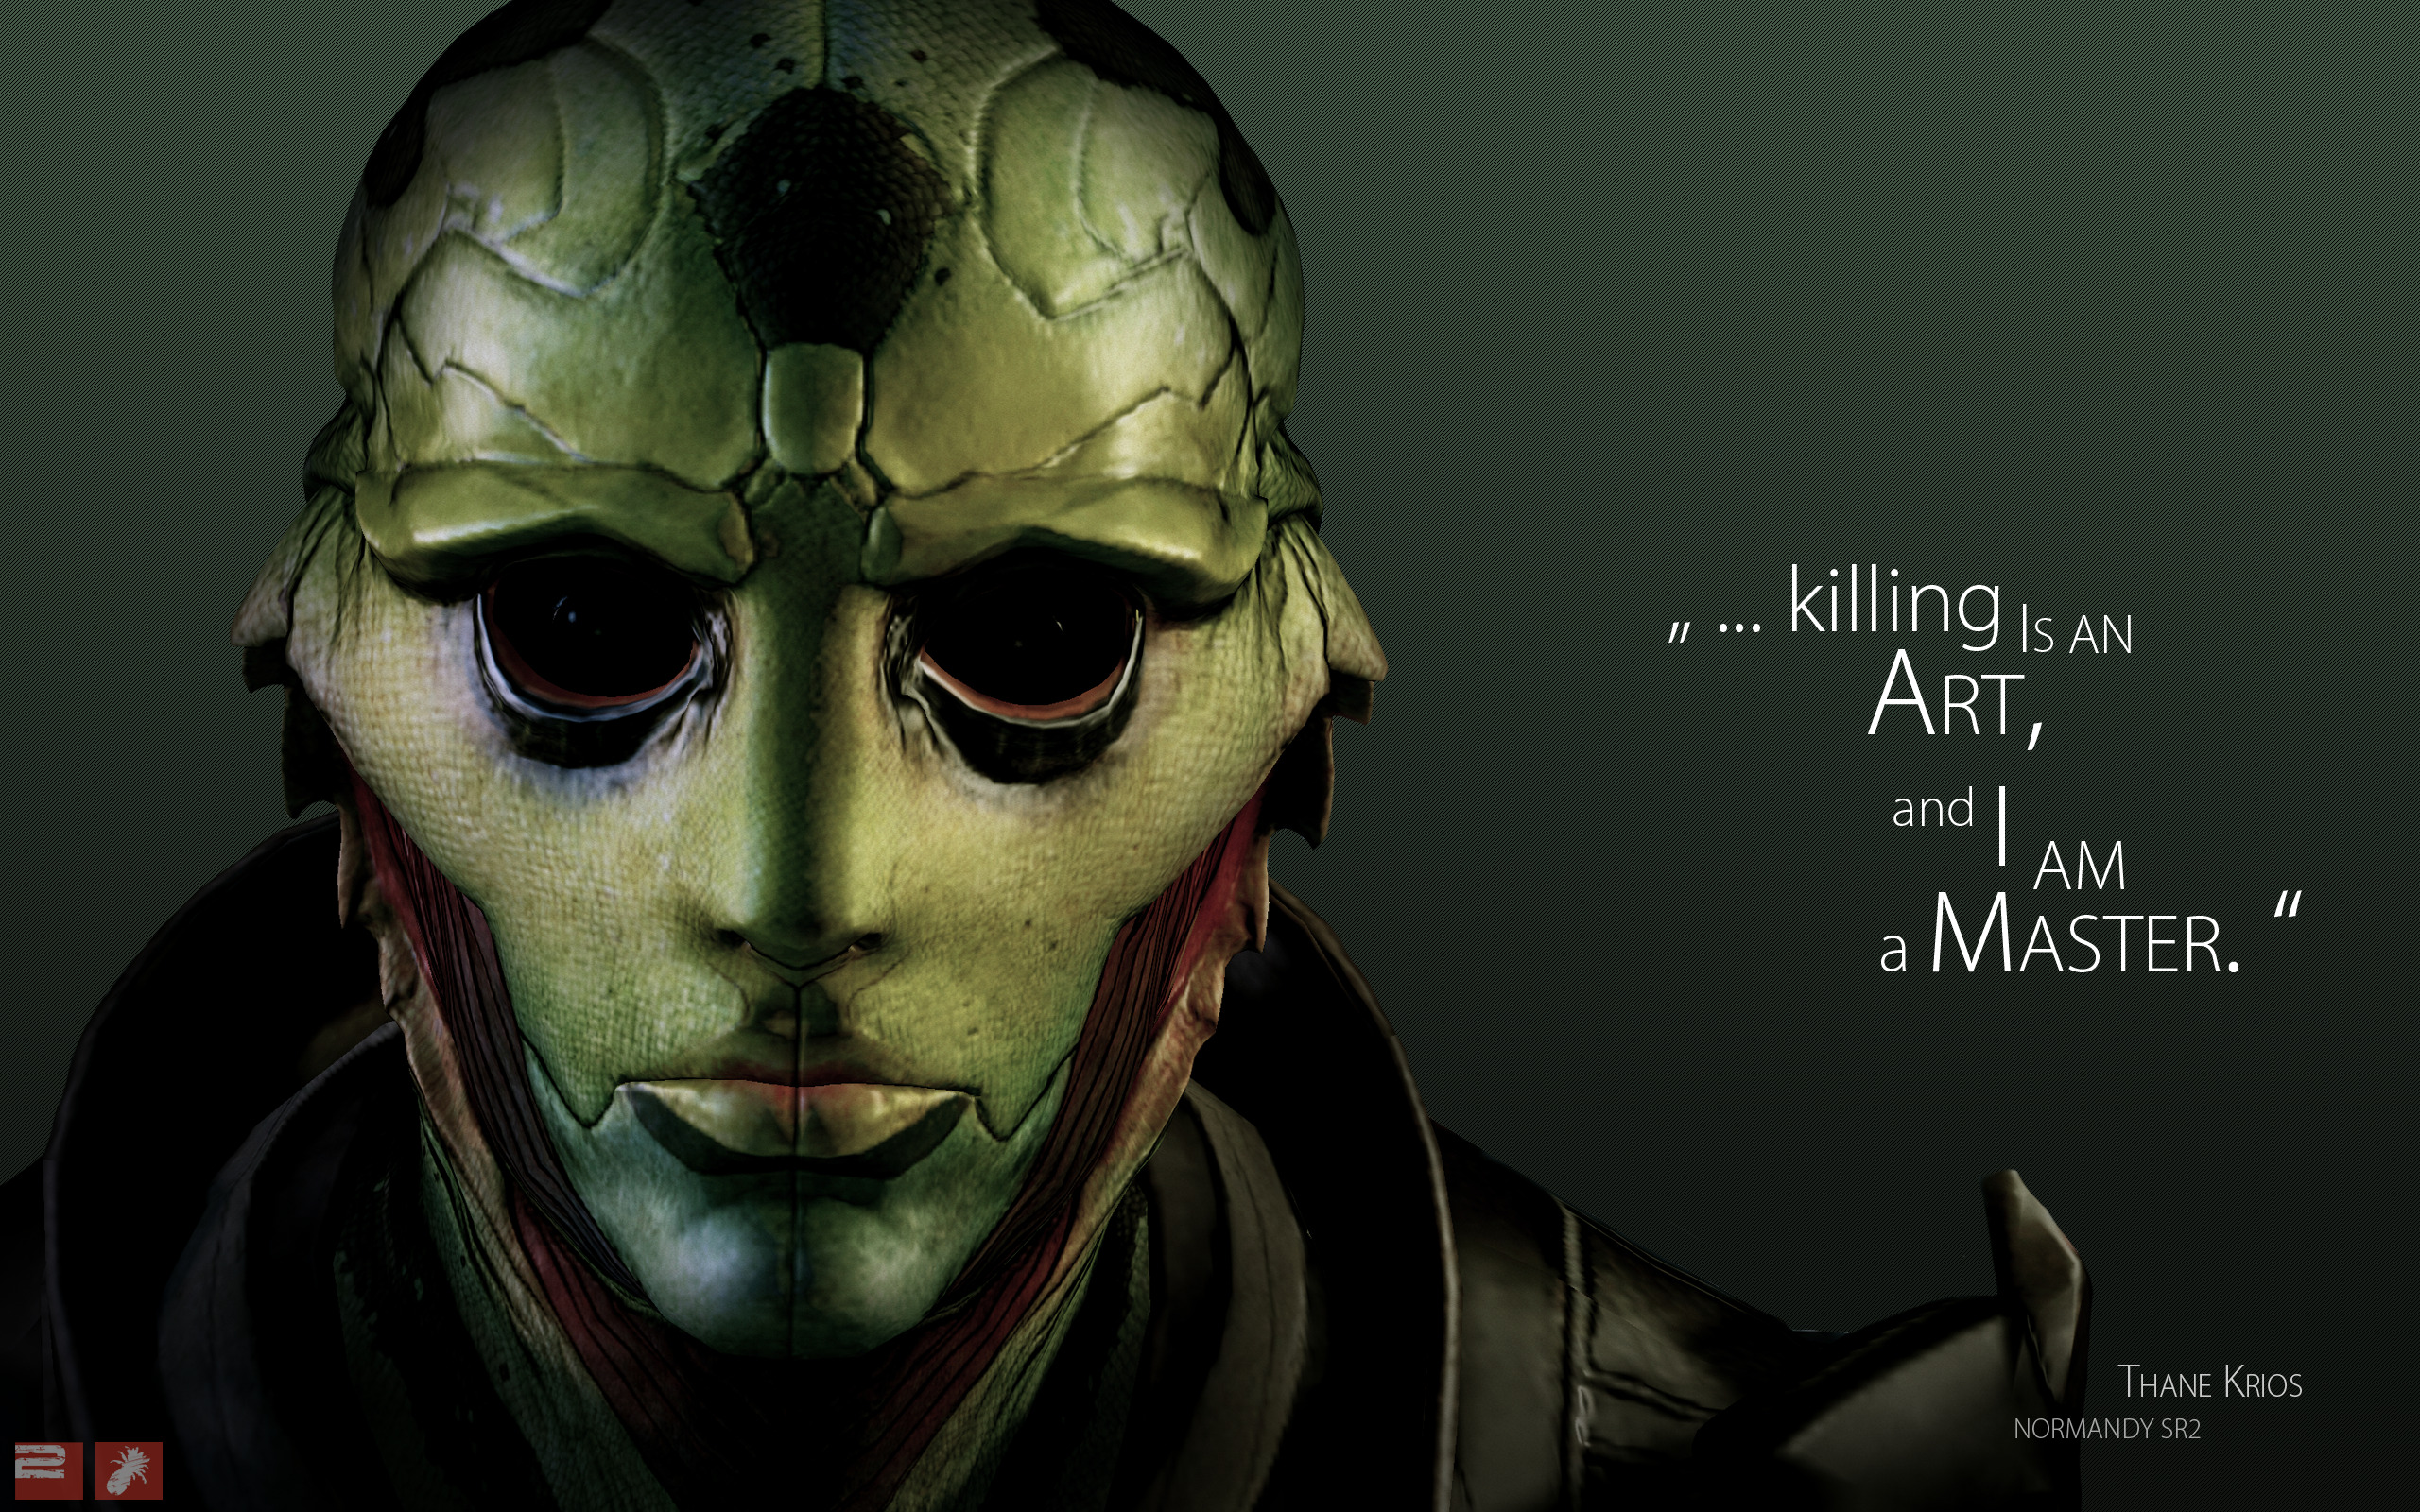 Mass Effect Epic Quote - HD Wallpaper 